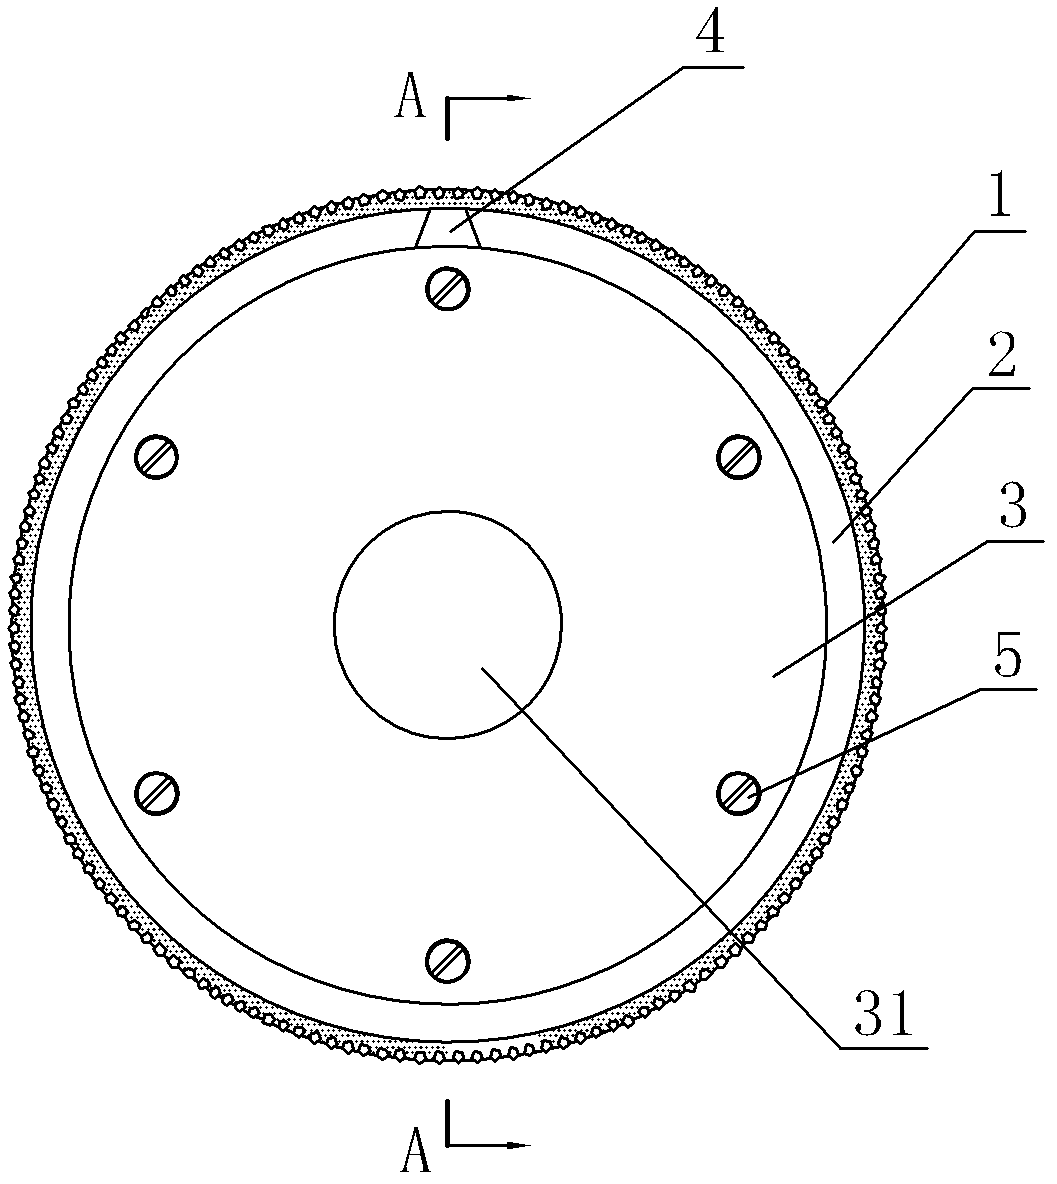 Method for manufacturing electroplated diamond grinding wheel capable of being recycled easily